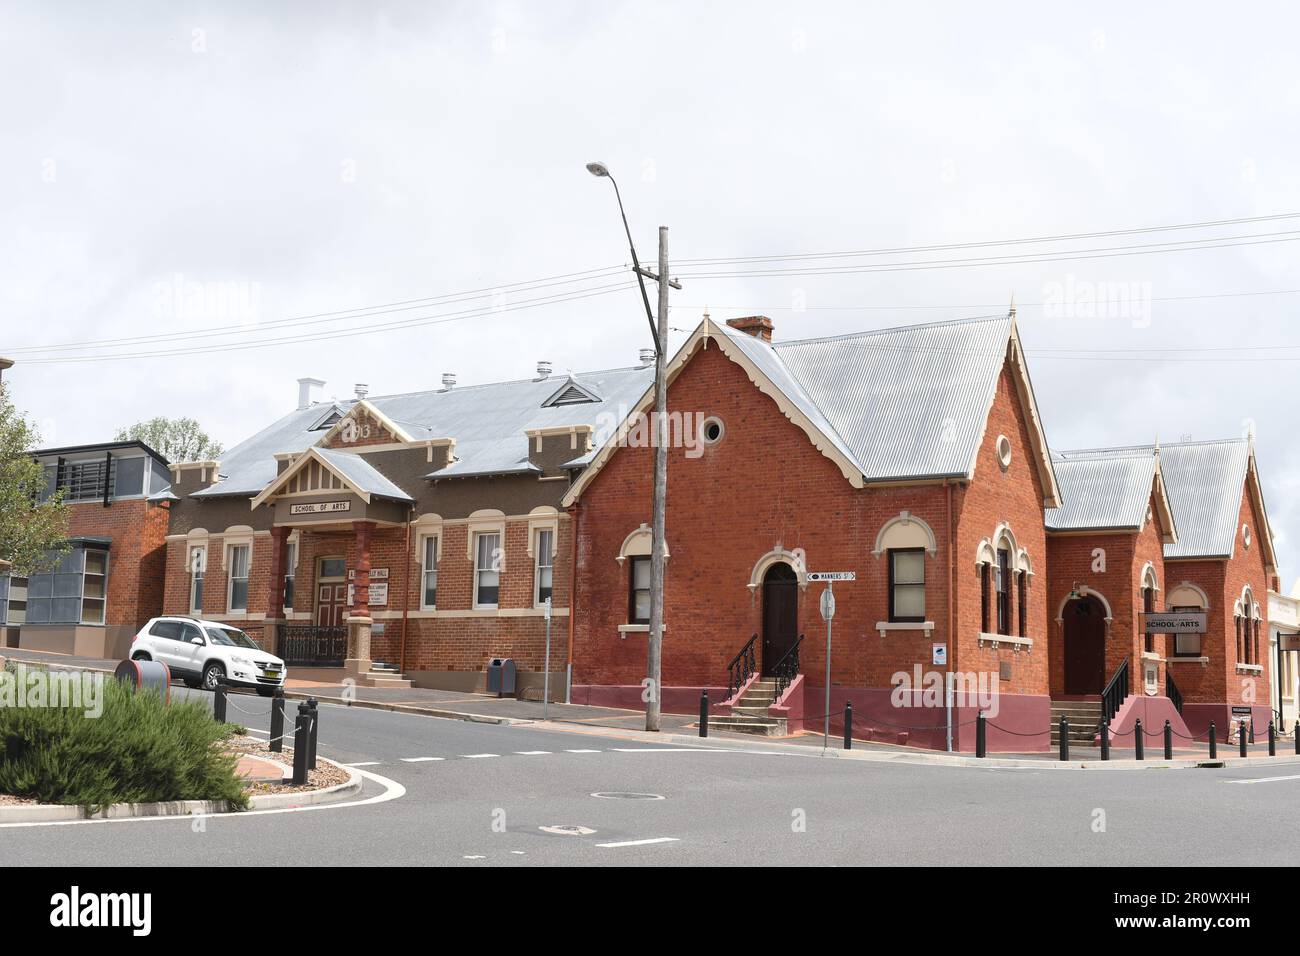 The Sir Henry Parkes School of Arts. In 1889, Henry Parkes delivered a speech here on the need for the Australian colonies to federate into one nation. Stock Photo